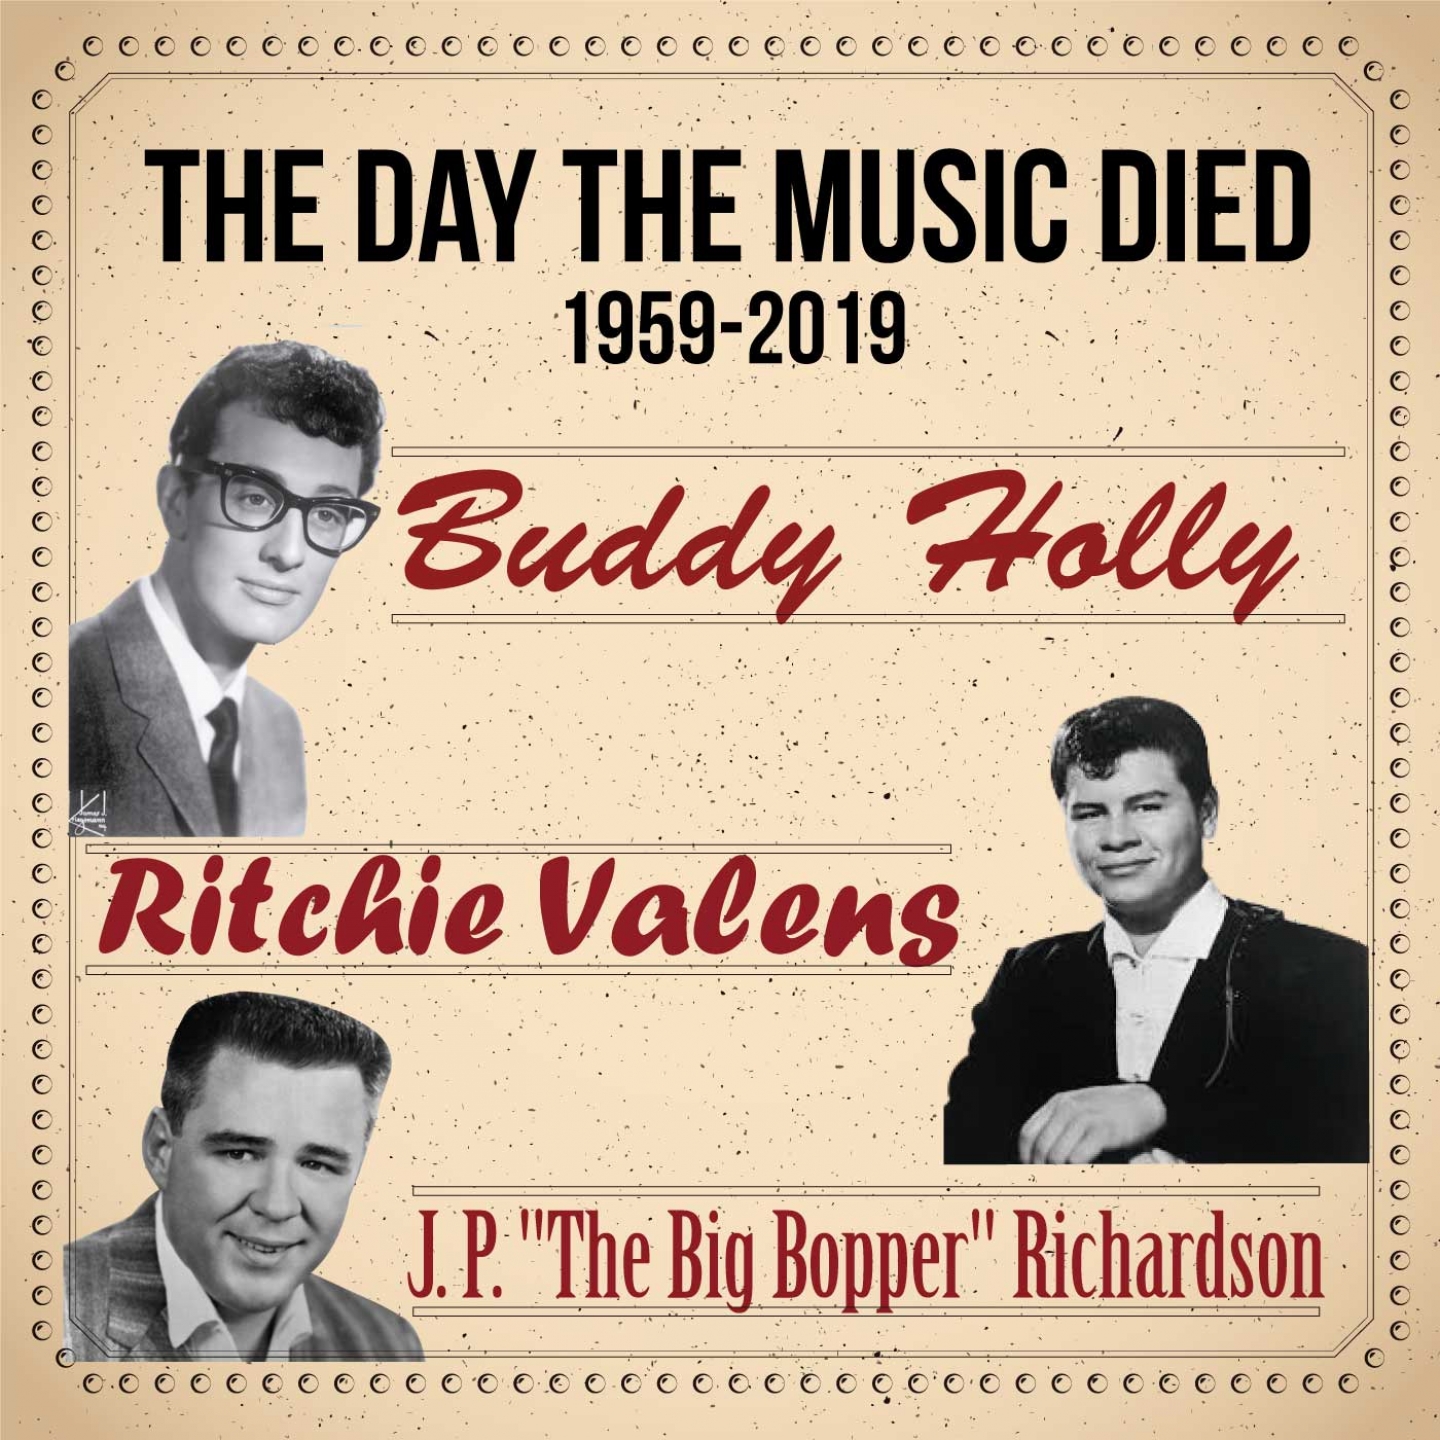 The Day the Music Died 1959-2019 (Buddy Holly, Ritchie Valens and J. P. "The Big Bopper" Richardson)